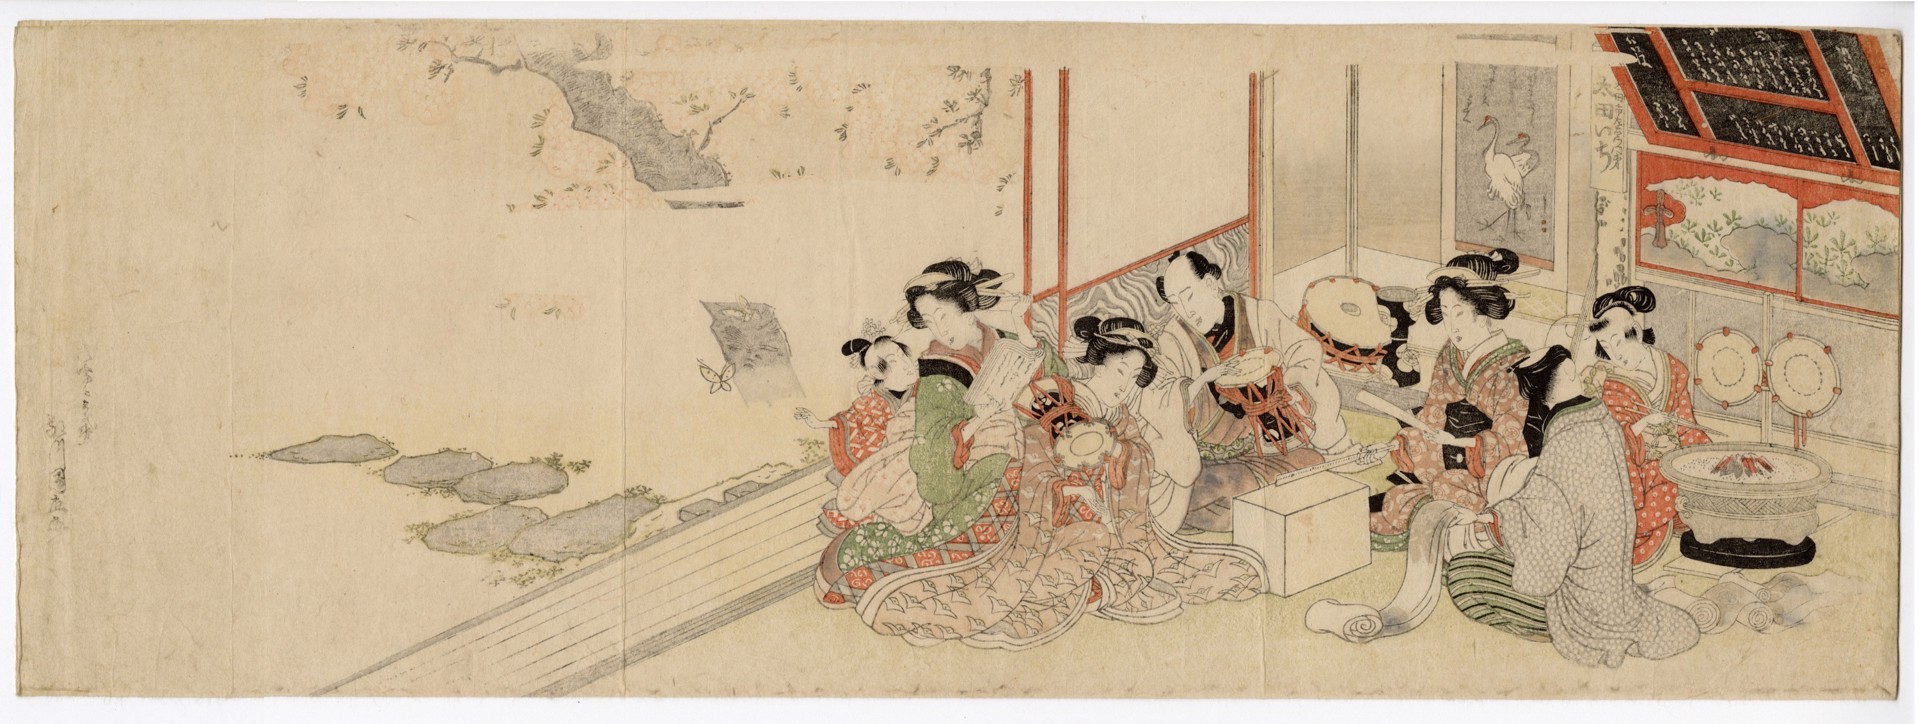 Musical new years party, with geisha, at a teahouse celebrating the birth of the lion child. by Kuninao